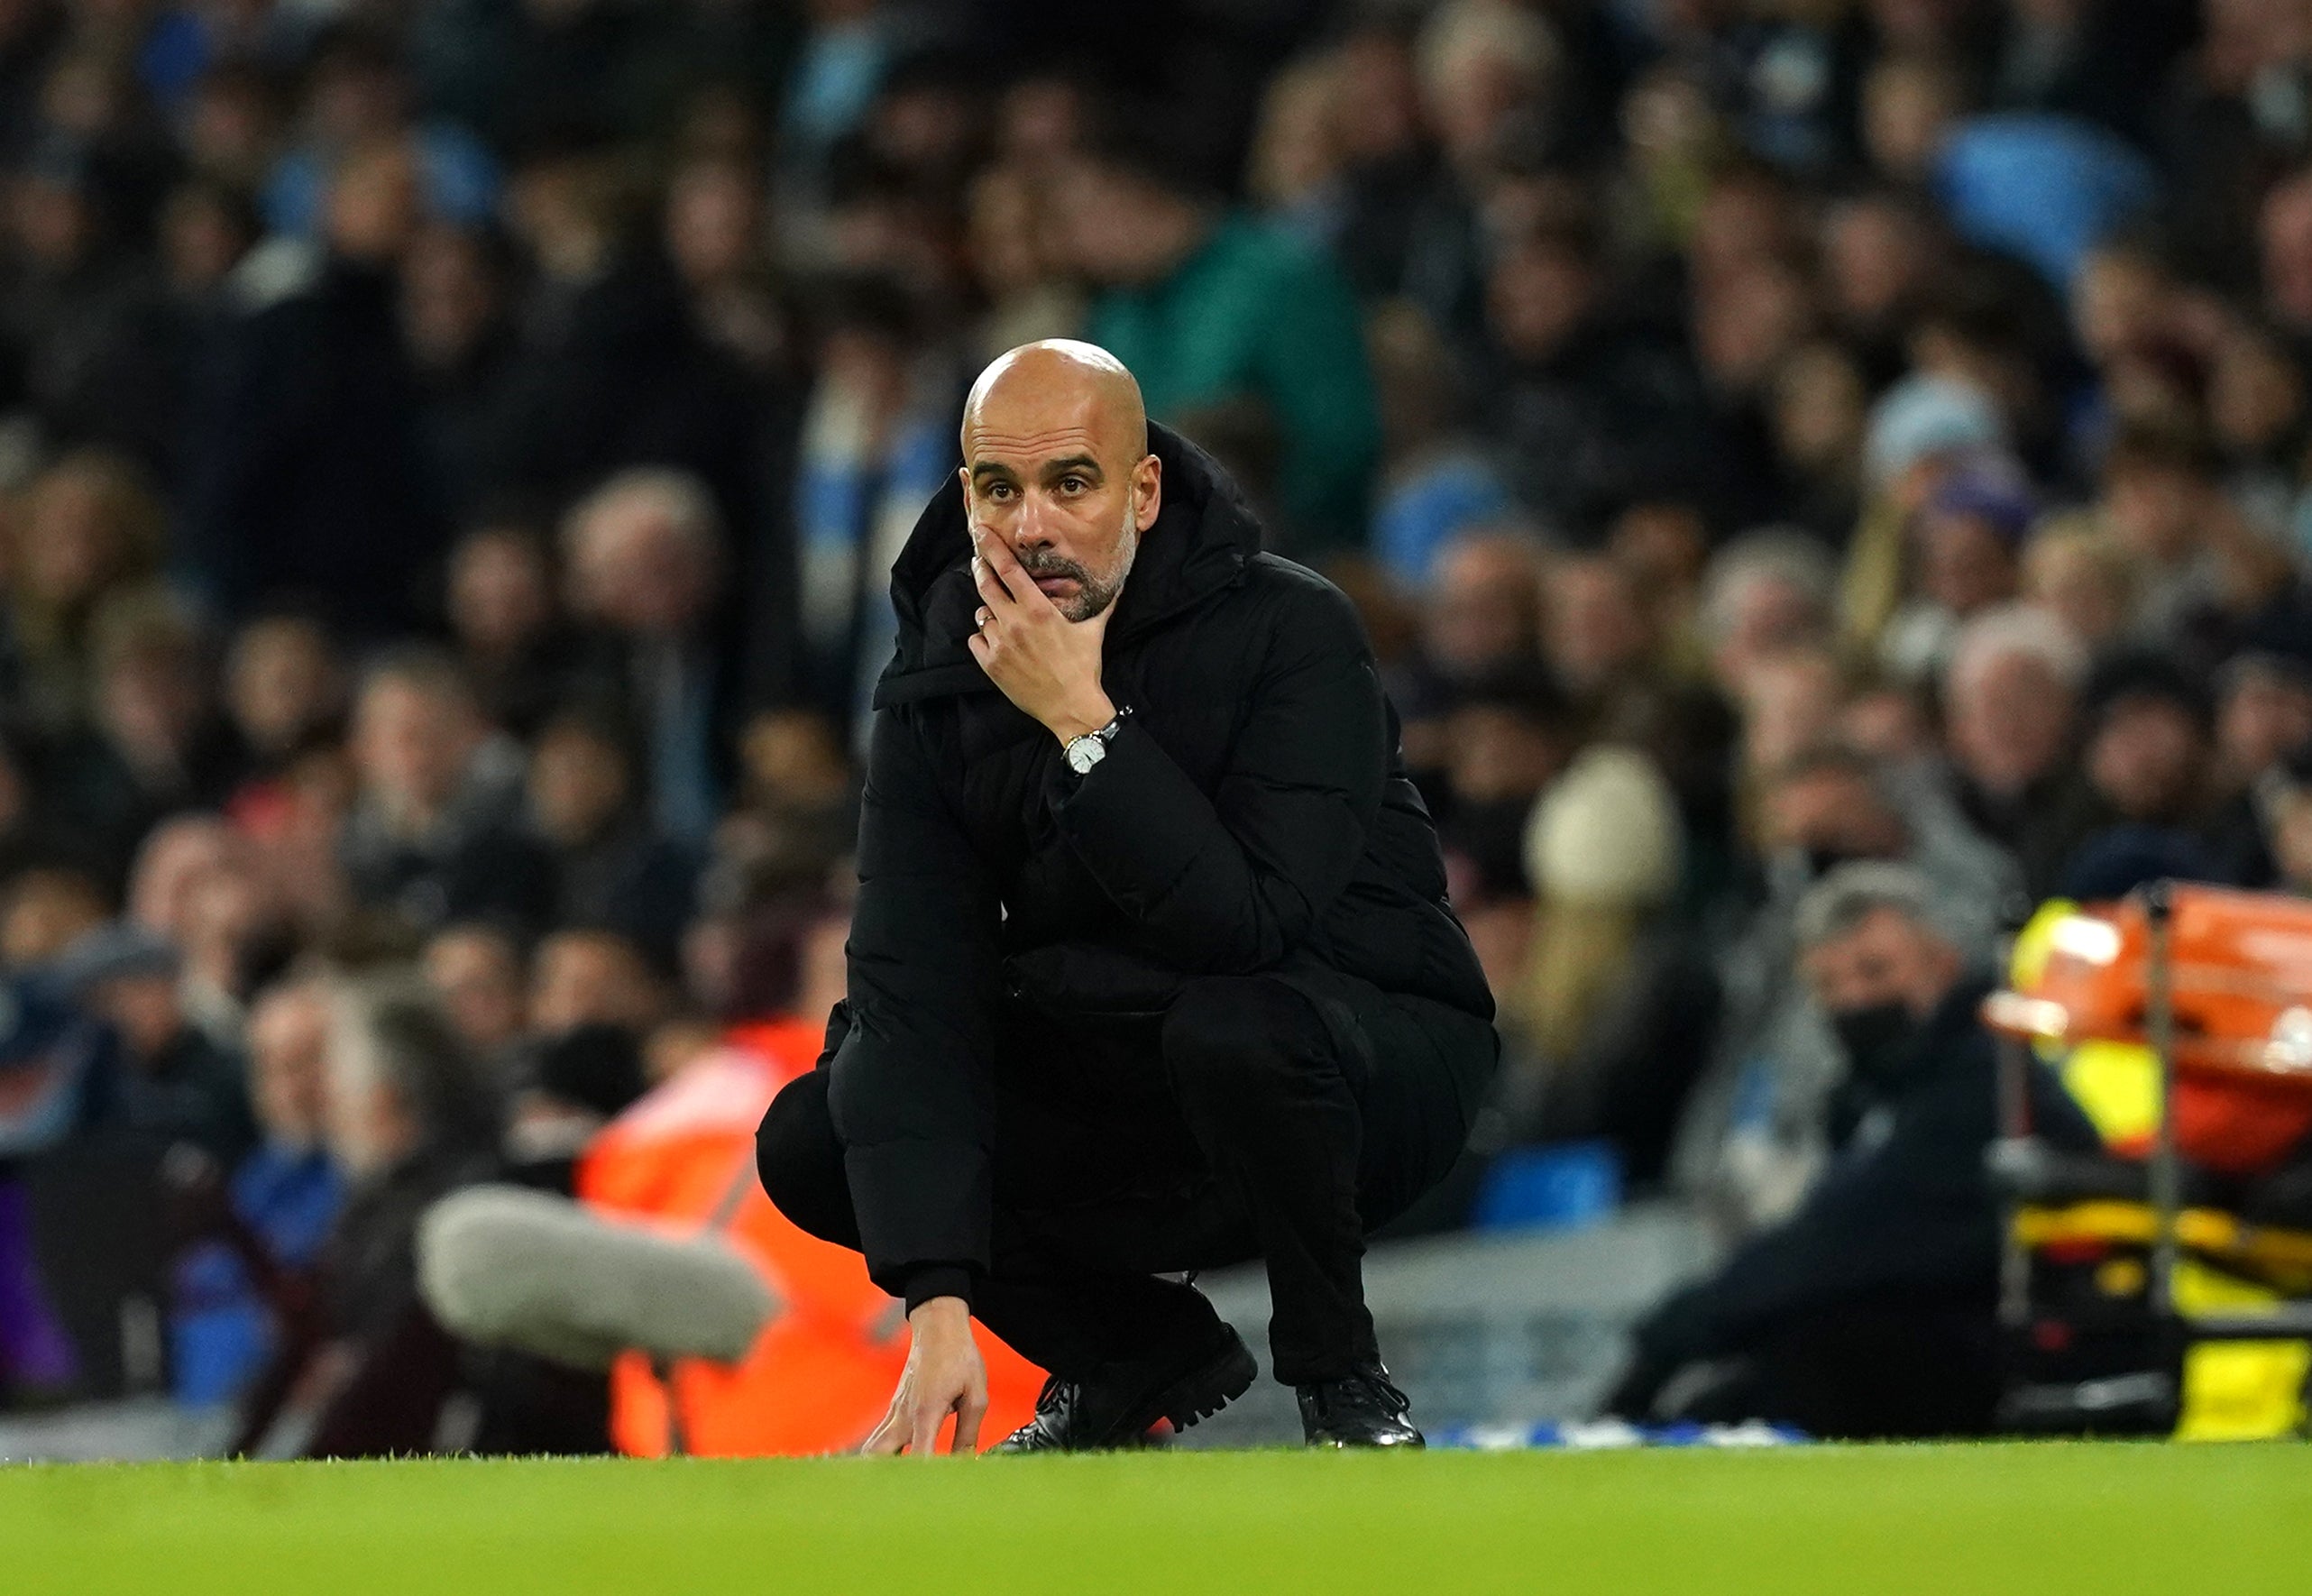 Manchester City manager Pep Guardiola missed a press conference on Friday after returning an inconclusive Covid-19 test (Martin Rickett/PA)